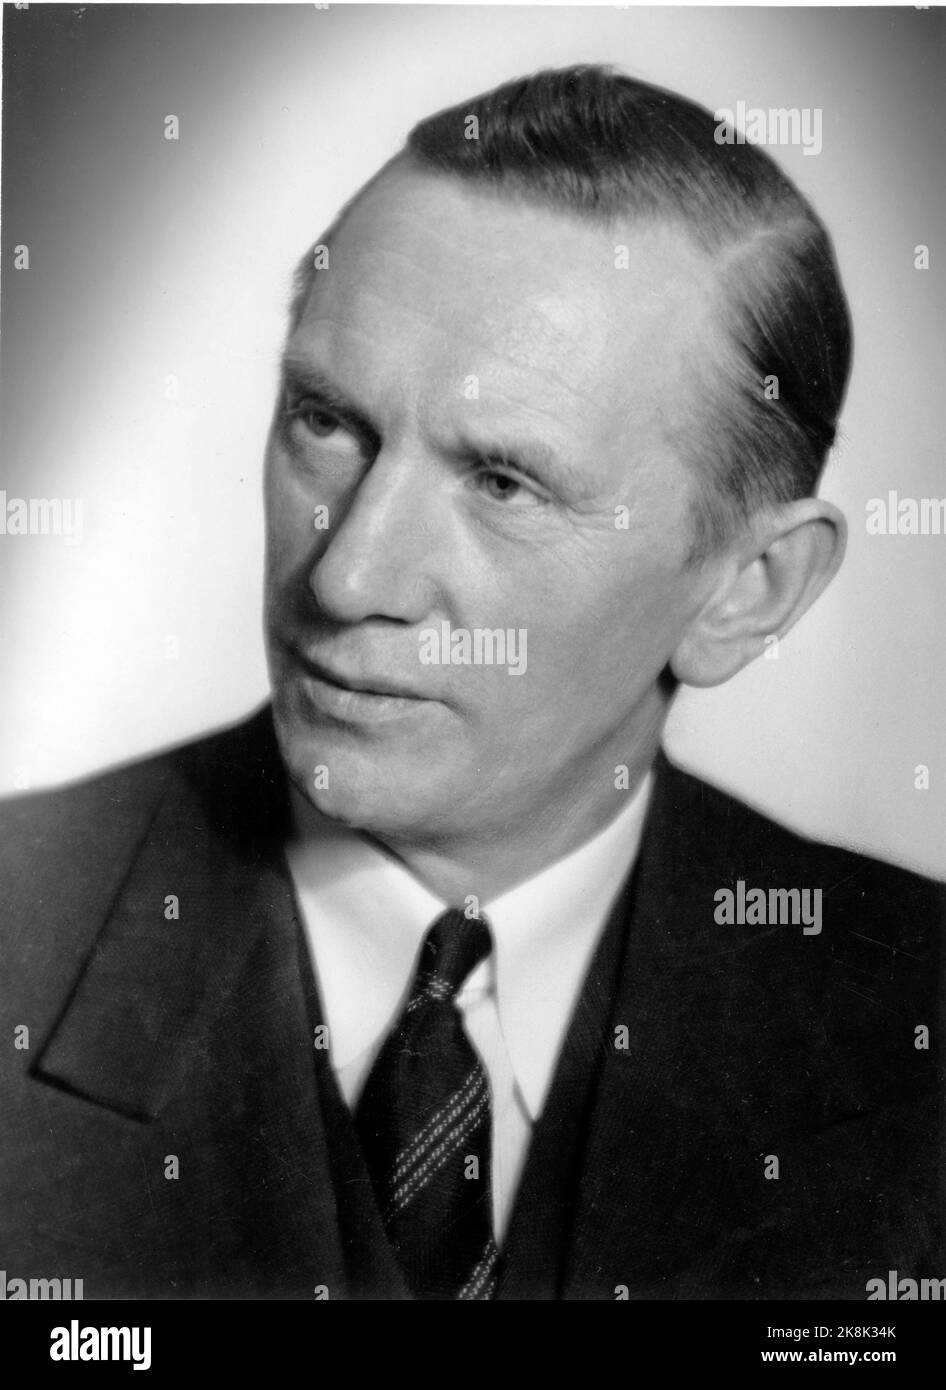 Oscar Torp (1893-1958) Norway's prime minister from 19/11-1951 to 22/1-1955. He was chairman of the Labor Party 1923-1945, Mayor of Oslo 1935-36. Storting representative 1950-53, 1954-58, Storting President 1955-1958. Has also been Minister of Defense, Minister of Social Affairs, Minister of Security, Finance Minister. Photo NTB / NTB Stock Photo